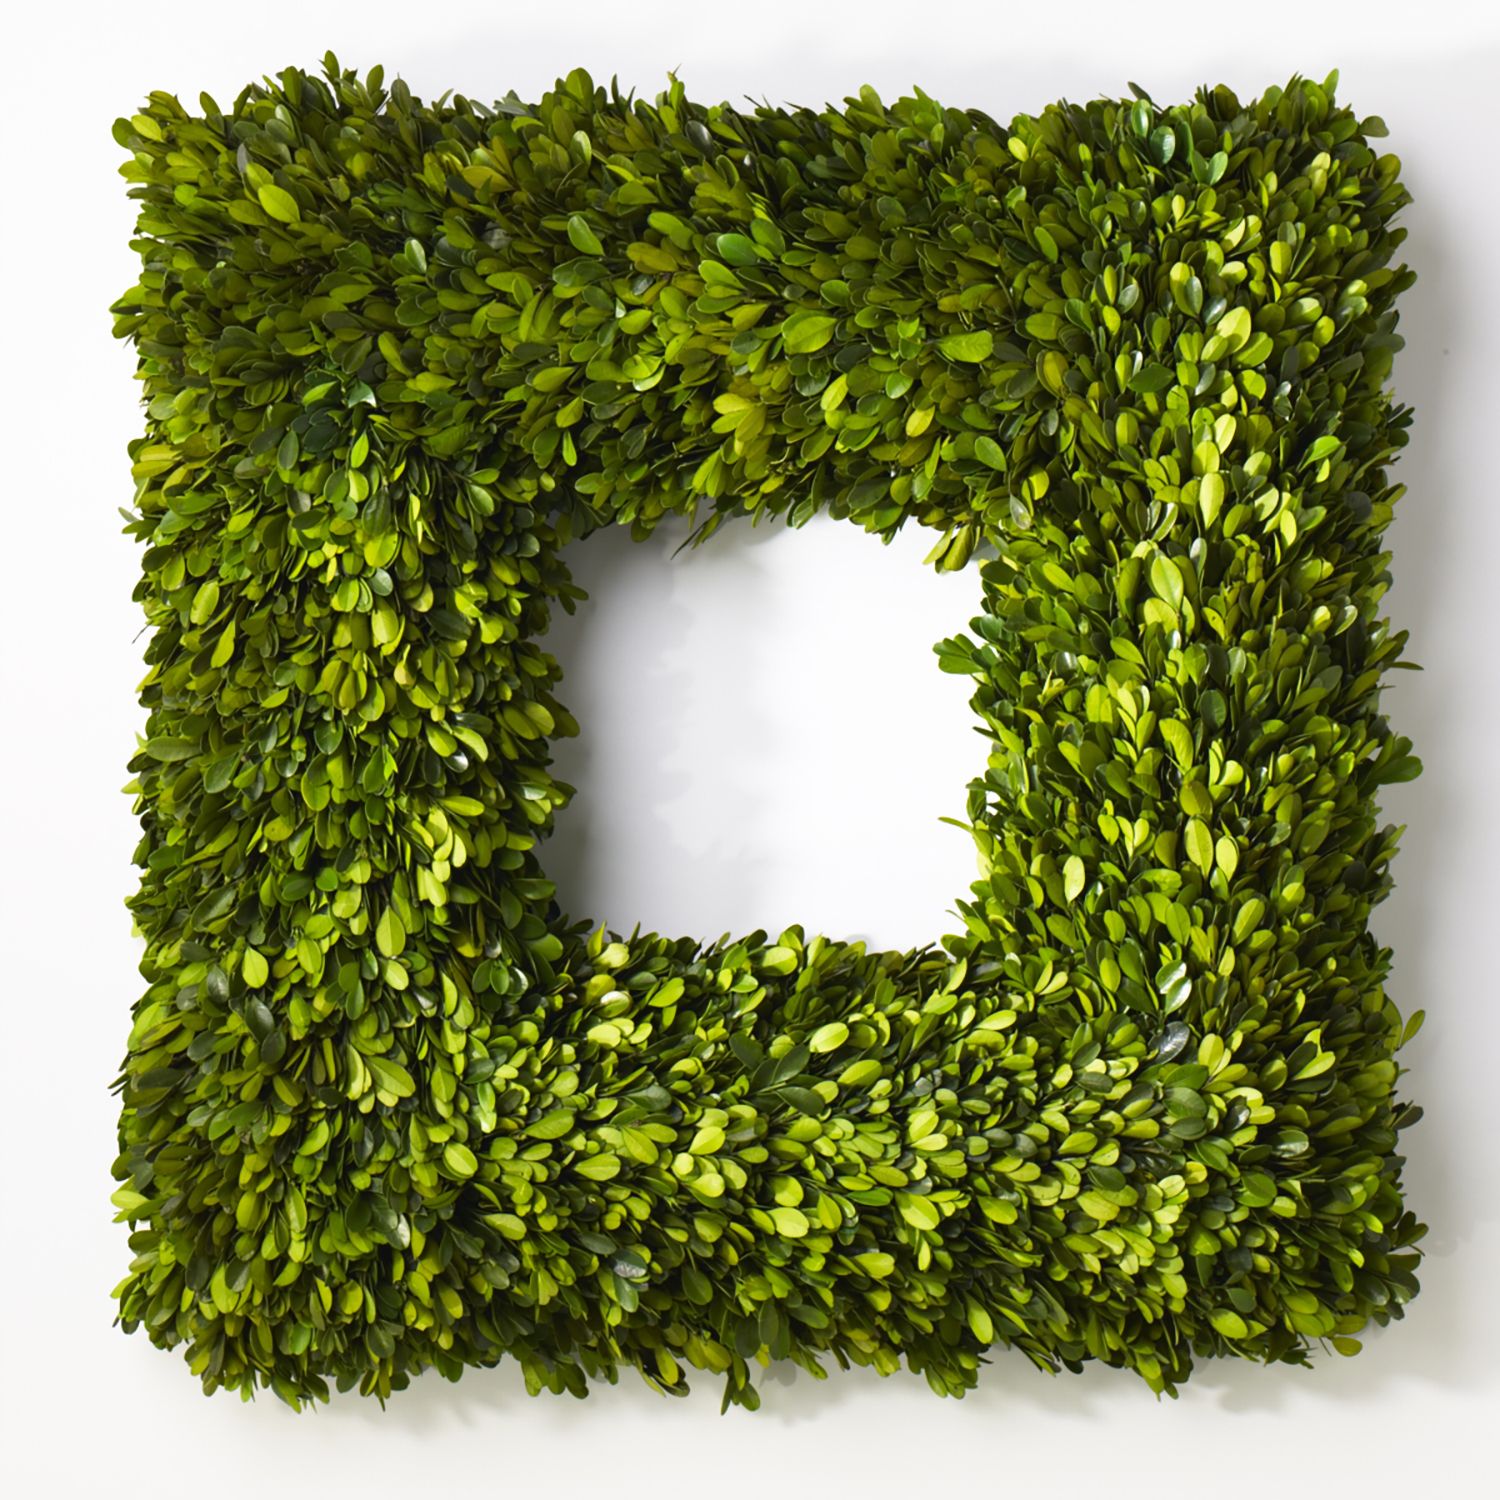 An assembled preserved boxwood wreath by Accent Decor on a white wall.